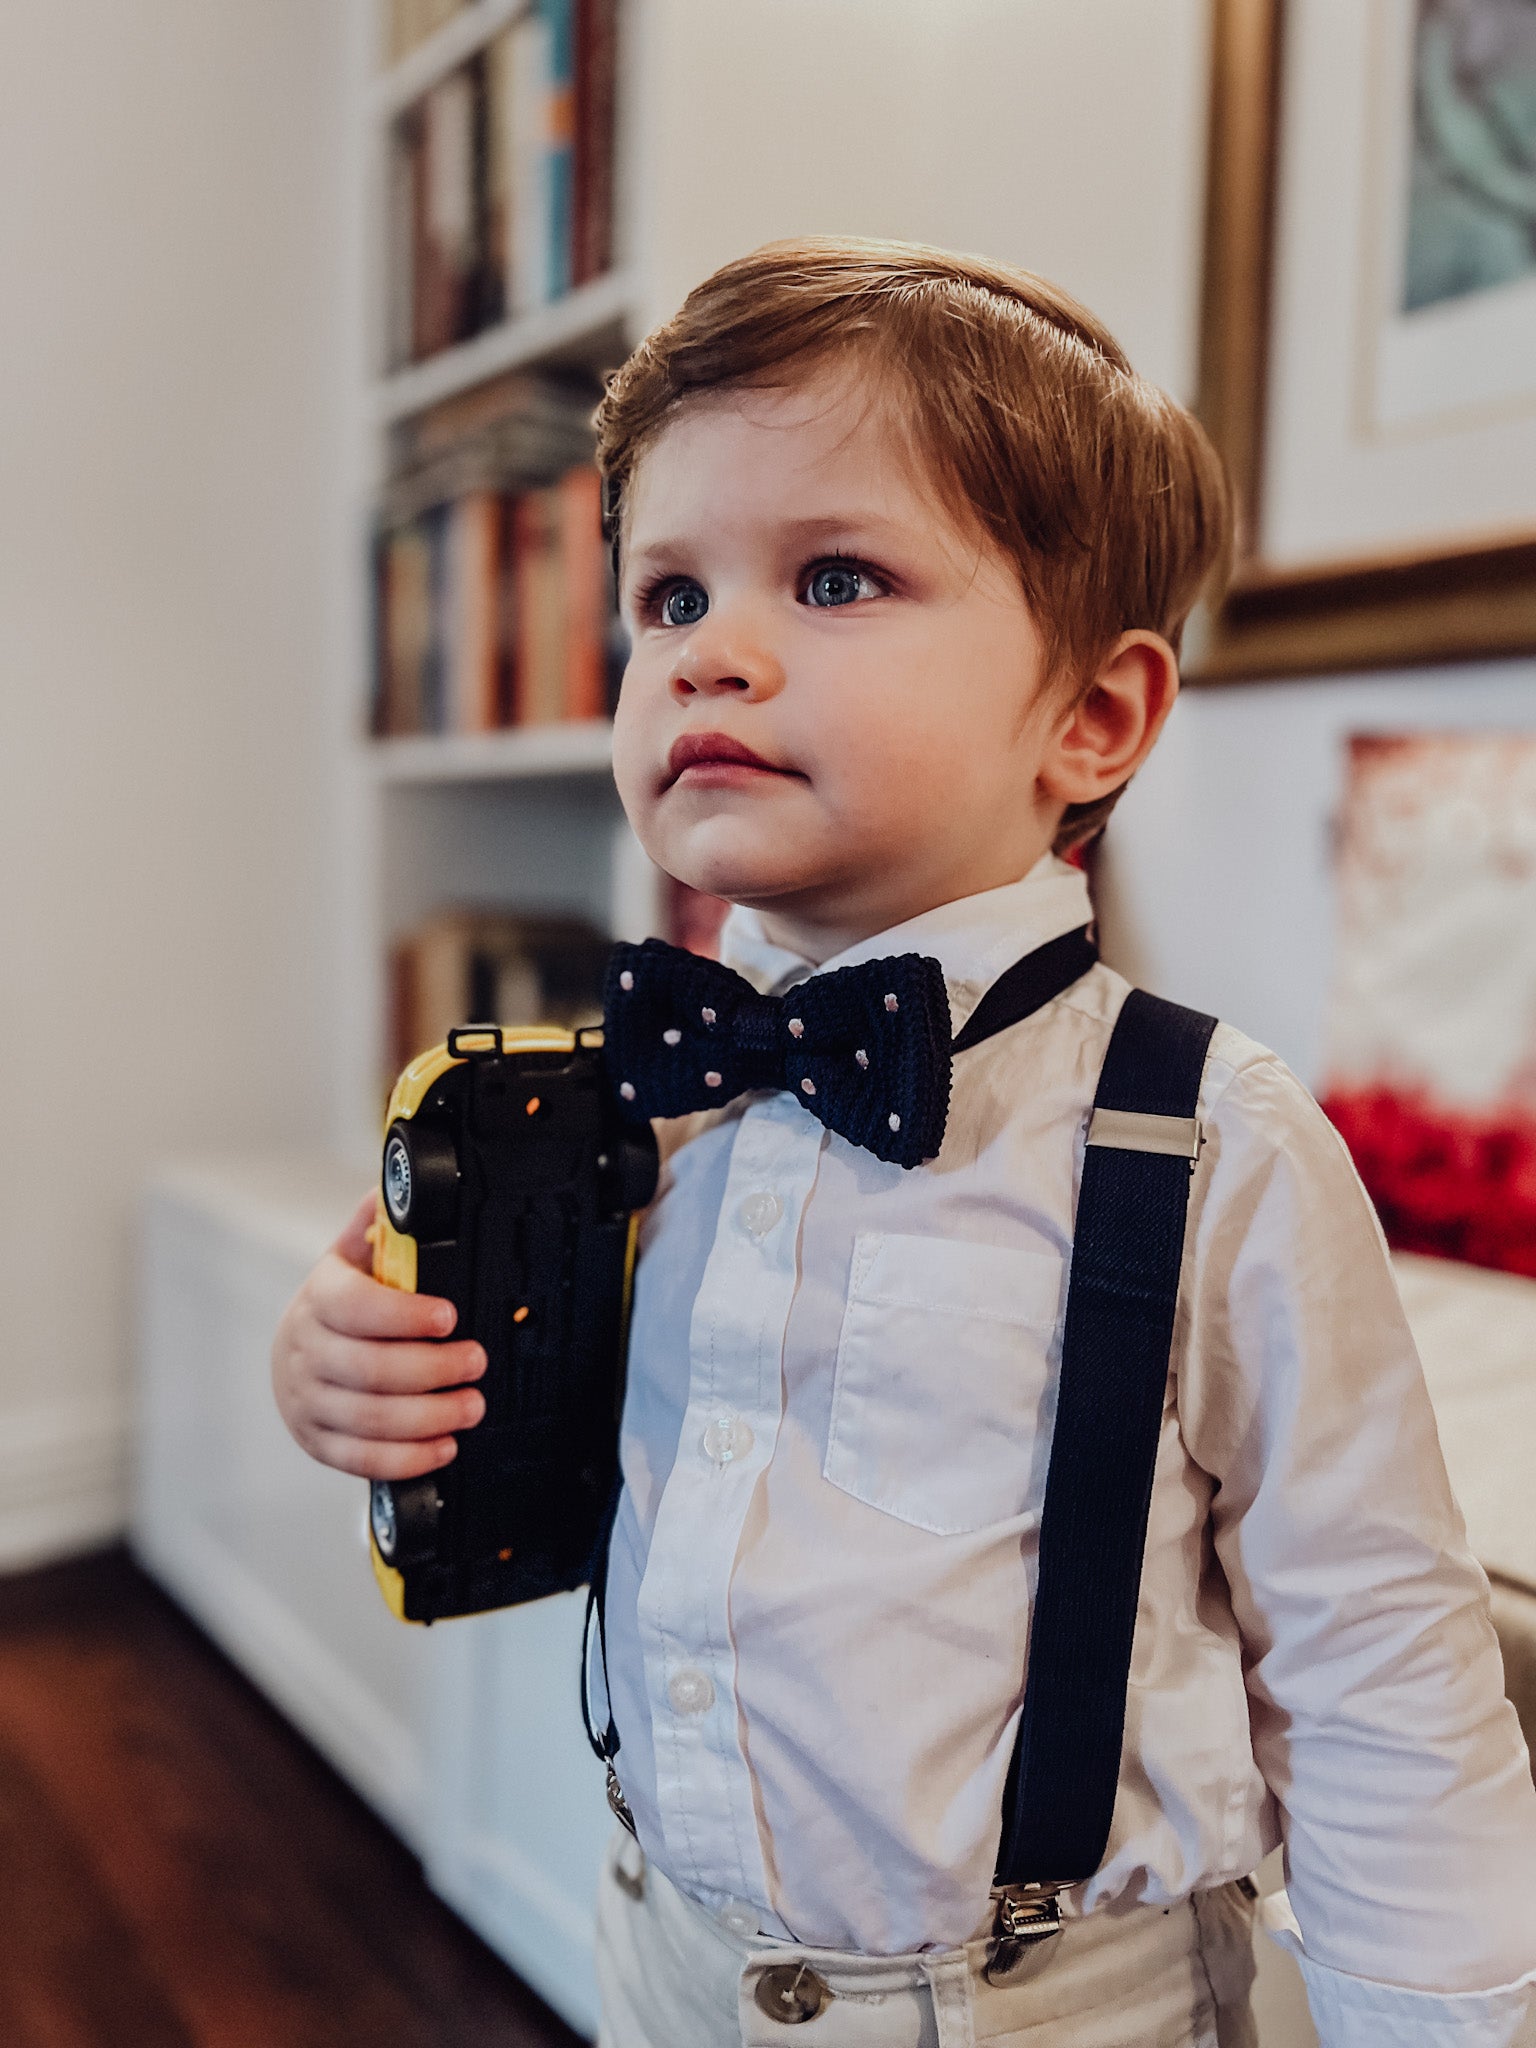 Blue suspenders and bow tie